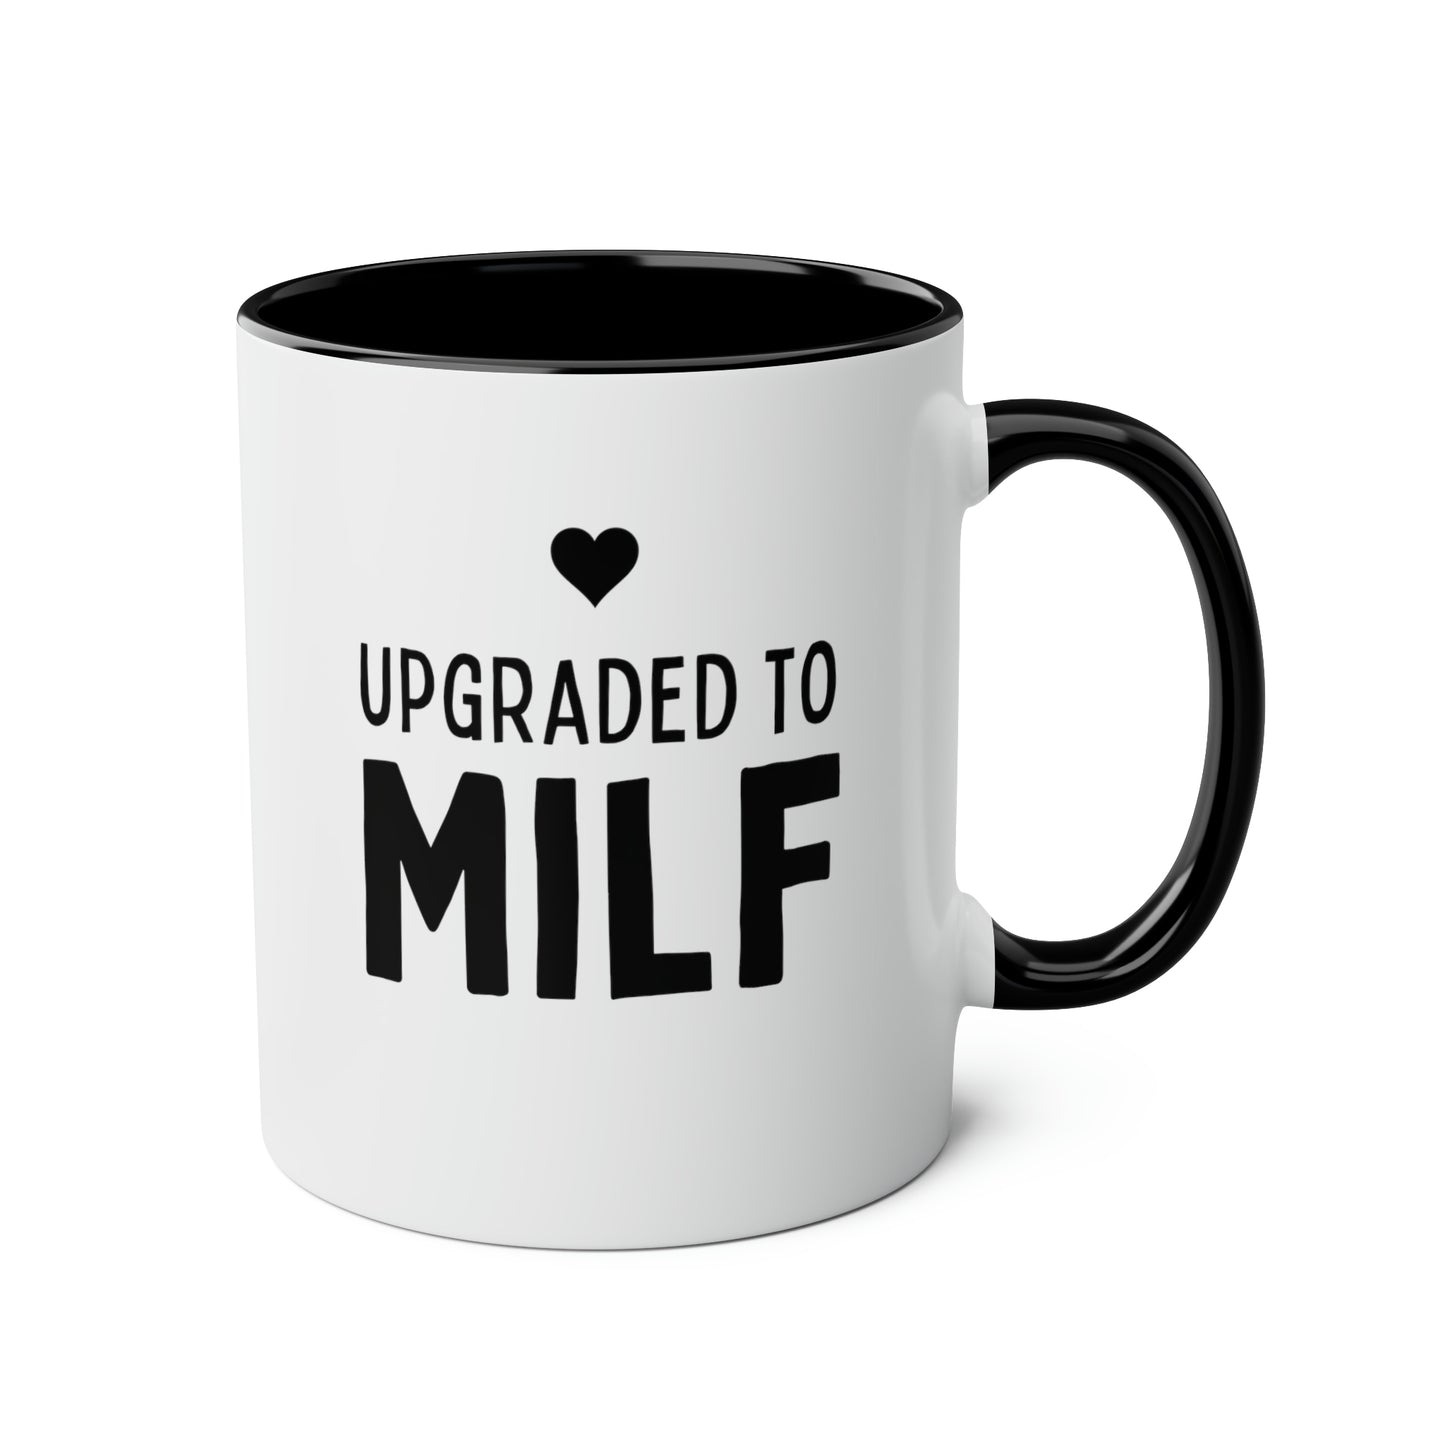 Upgraded to MILF 11oz white with black accent Funny large Coffee Mug gift for mothers day expecting mom new mom pregnancy announcement baby shower waveywares wavey wares wavywares wavy wares